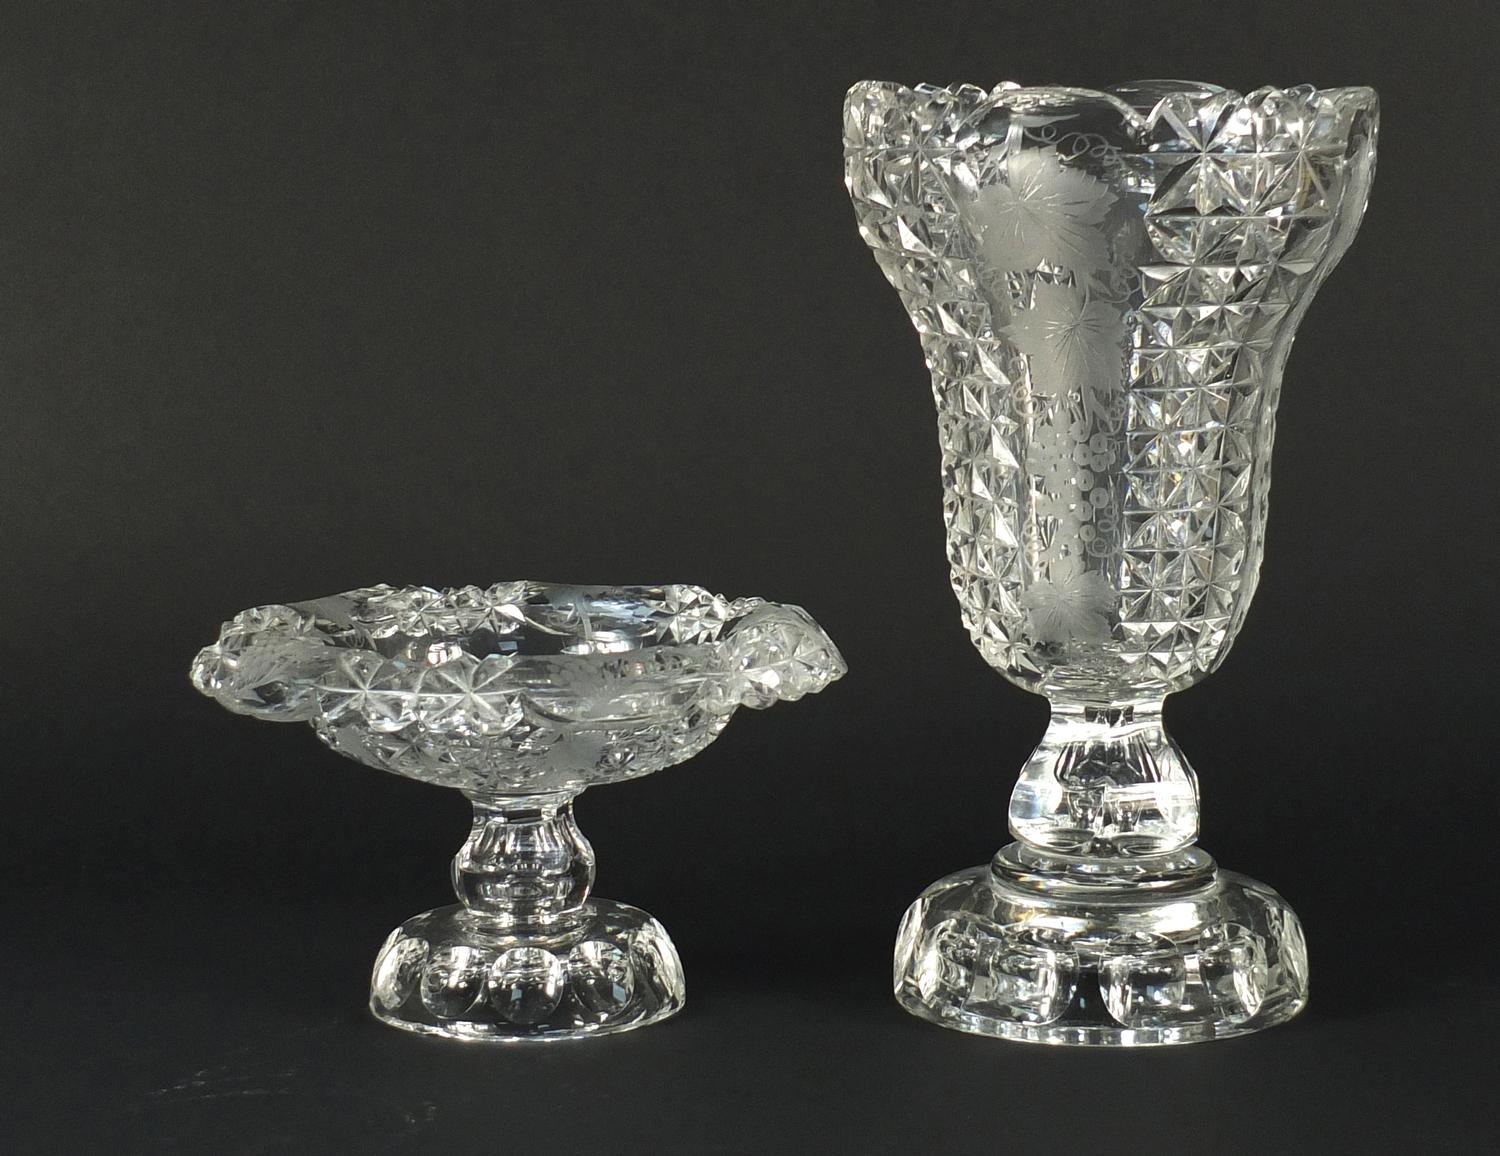 19th century cut glass vase and pedestal sweetmeat dish, etched with berries and leaves, the largest